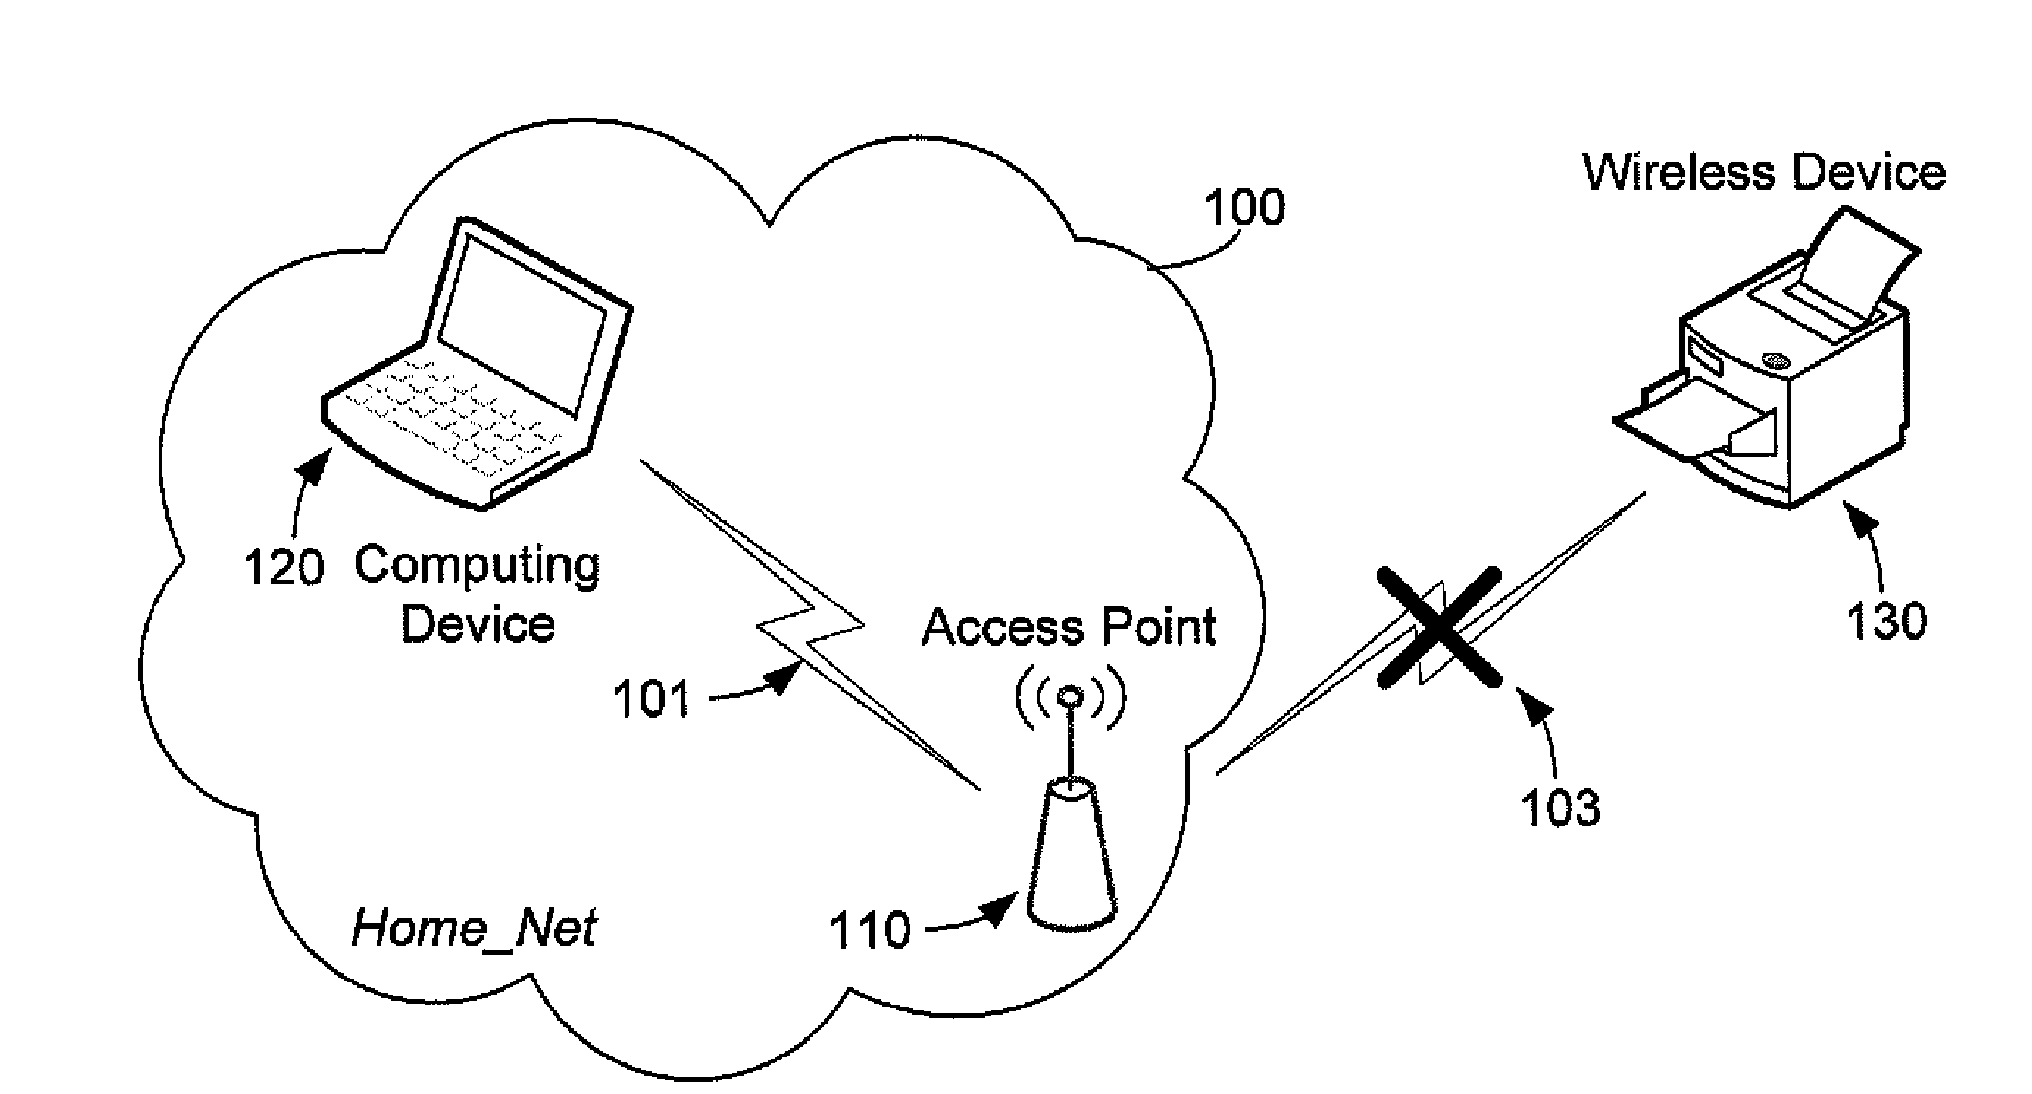 Wireless provisioning a device for a network using a soft access point